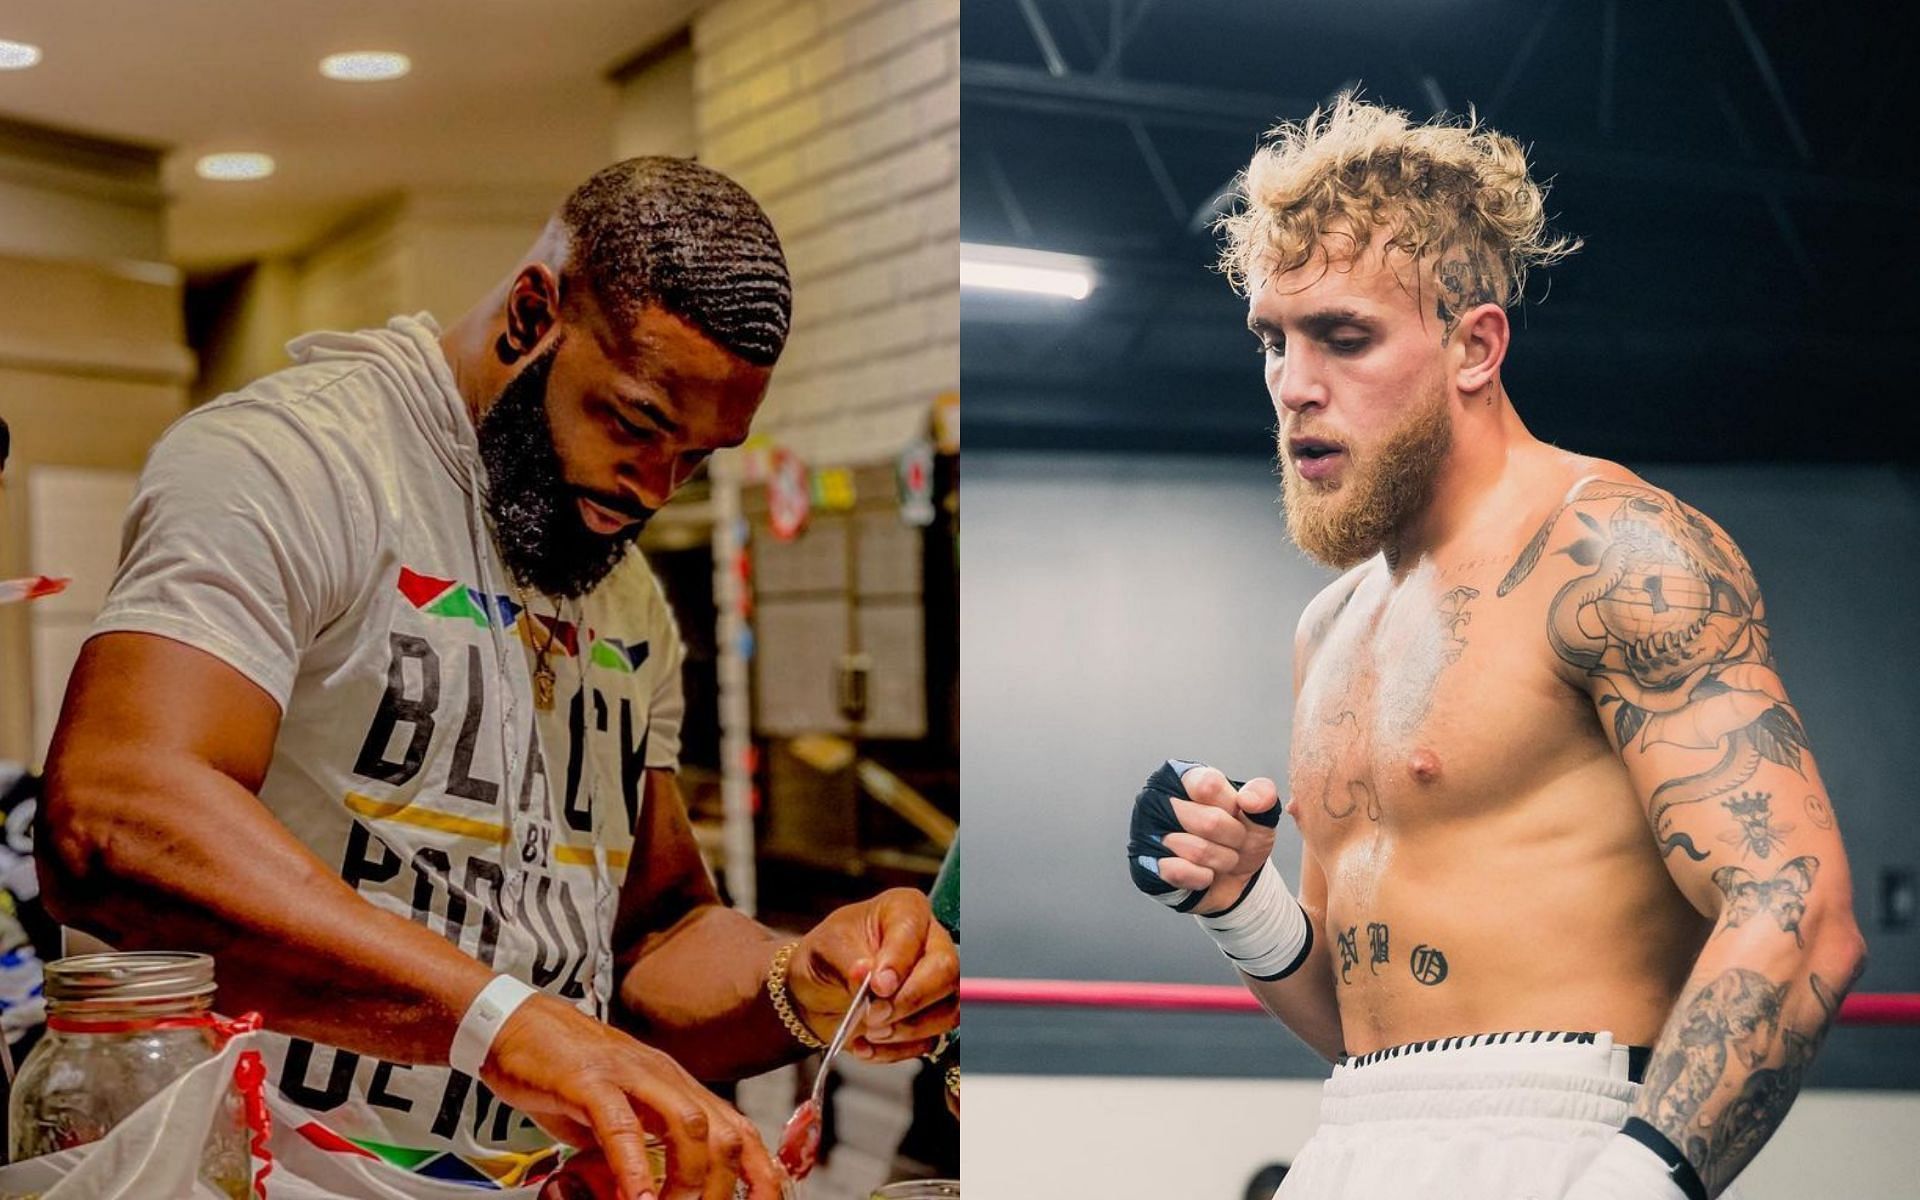 Tyron Woodley (left), Jake Paul (right) [Image Courtesy: @twooodley and @jakepaul on Instagram]